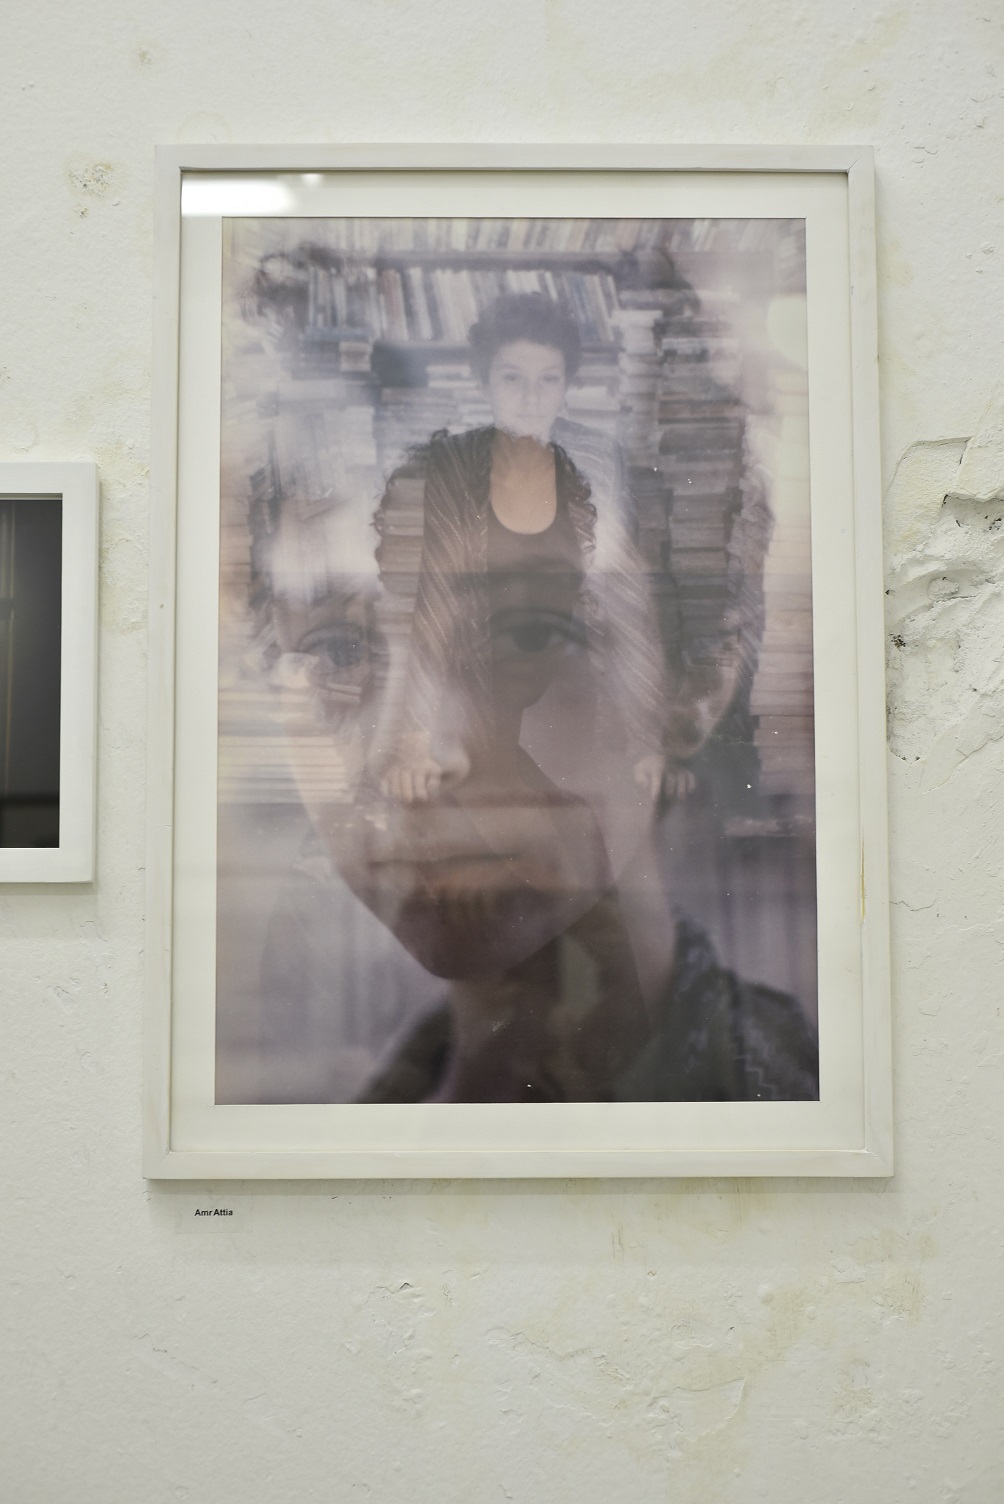 Part of an exhibition at Cairo Photo Week - Engy Fouad